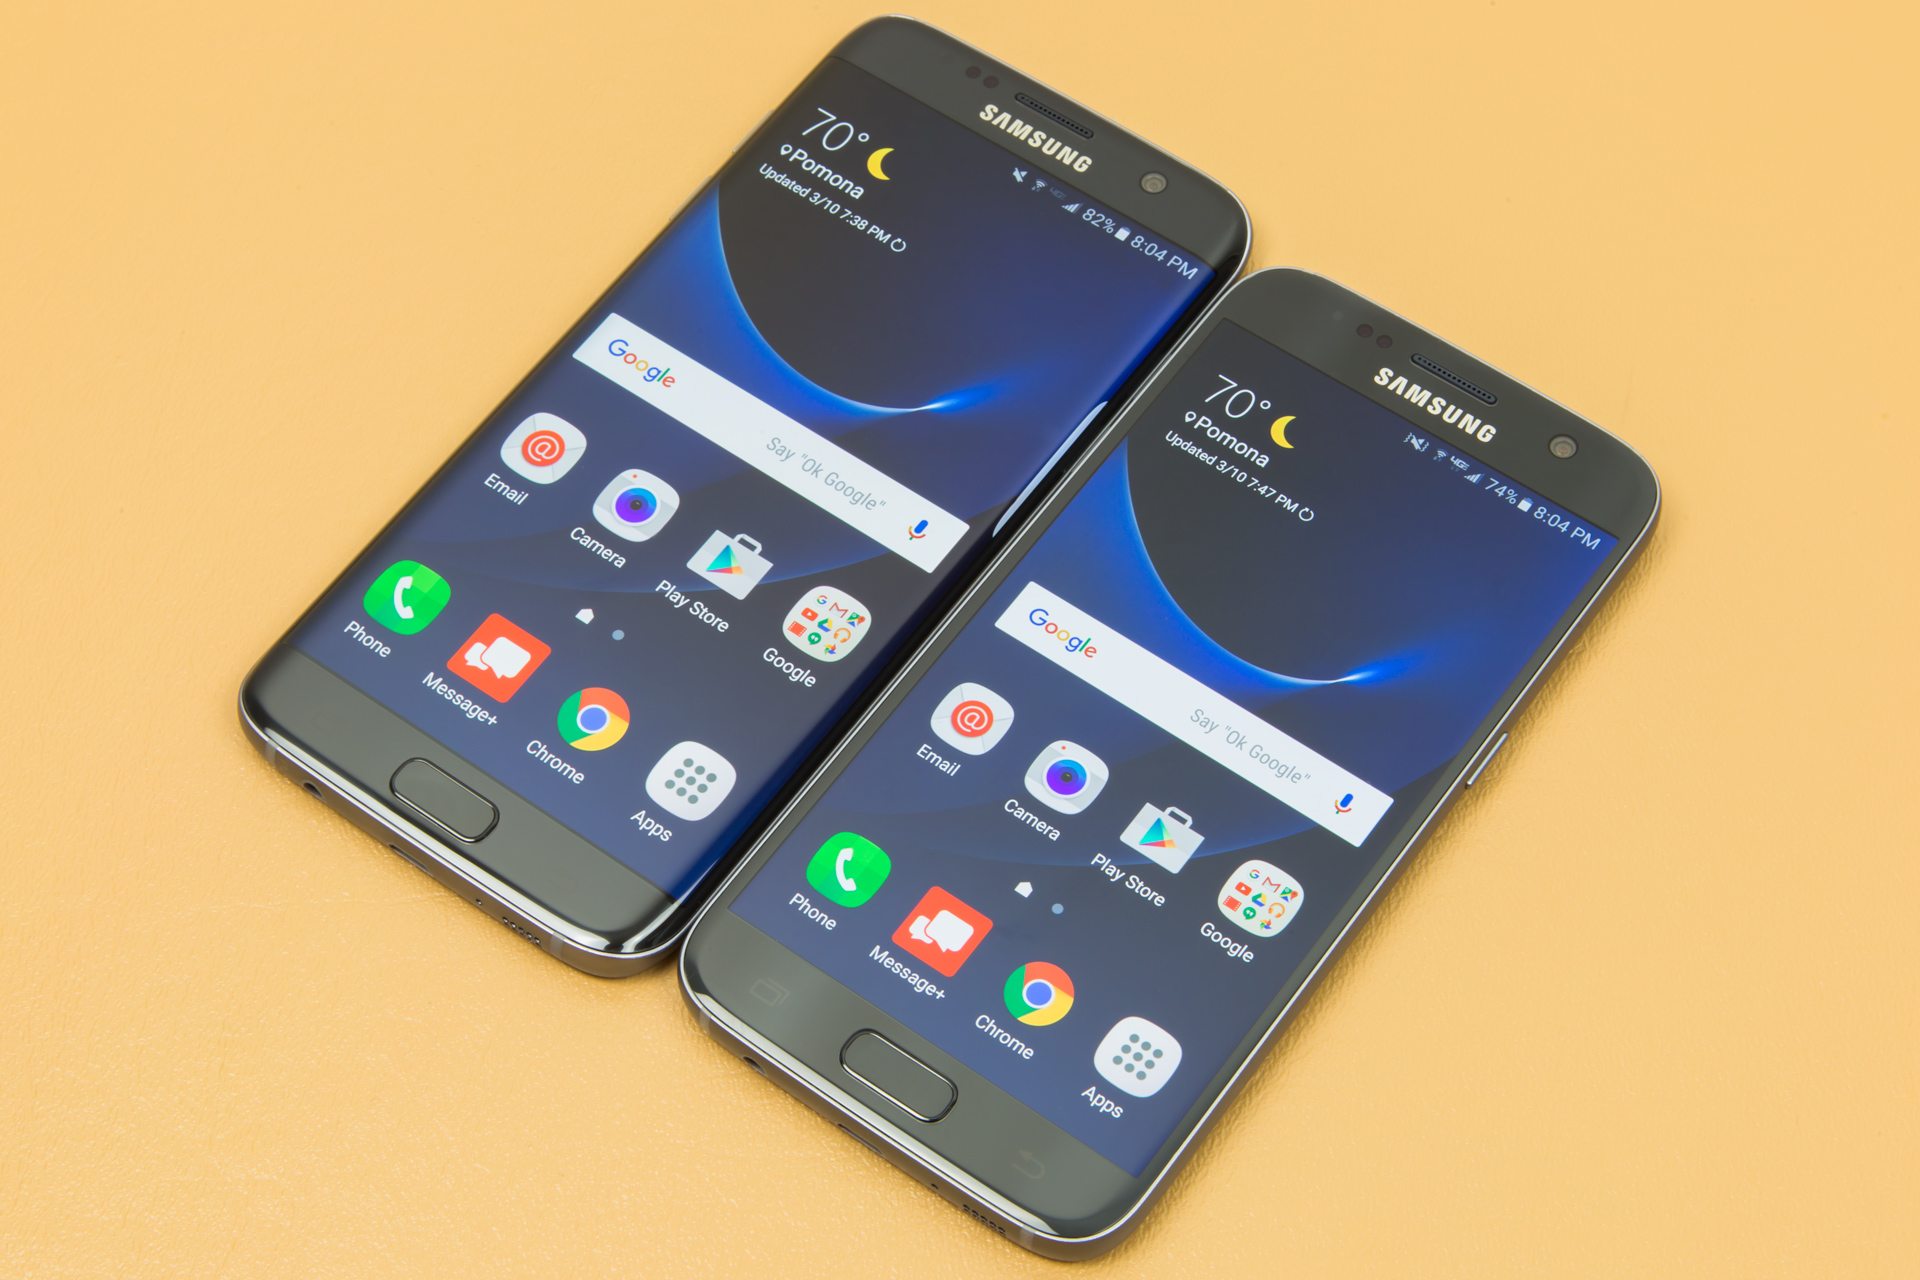 Here are the official Samsung Galaxy S7 and S7 edge wallpapers